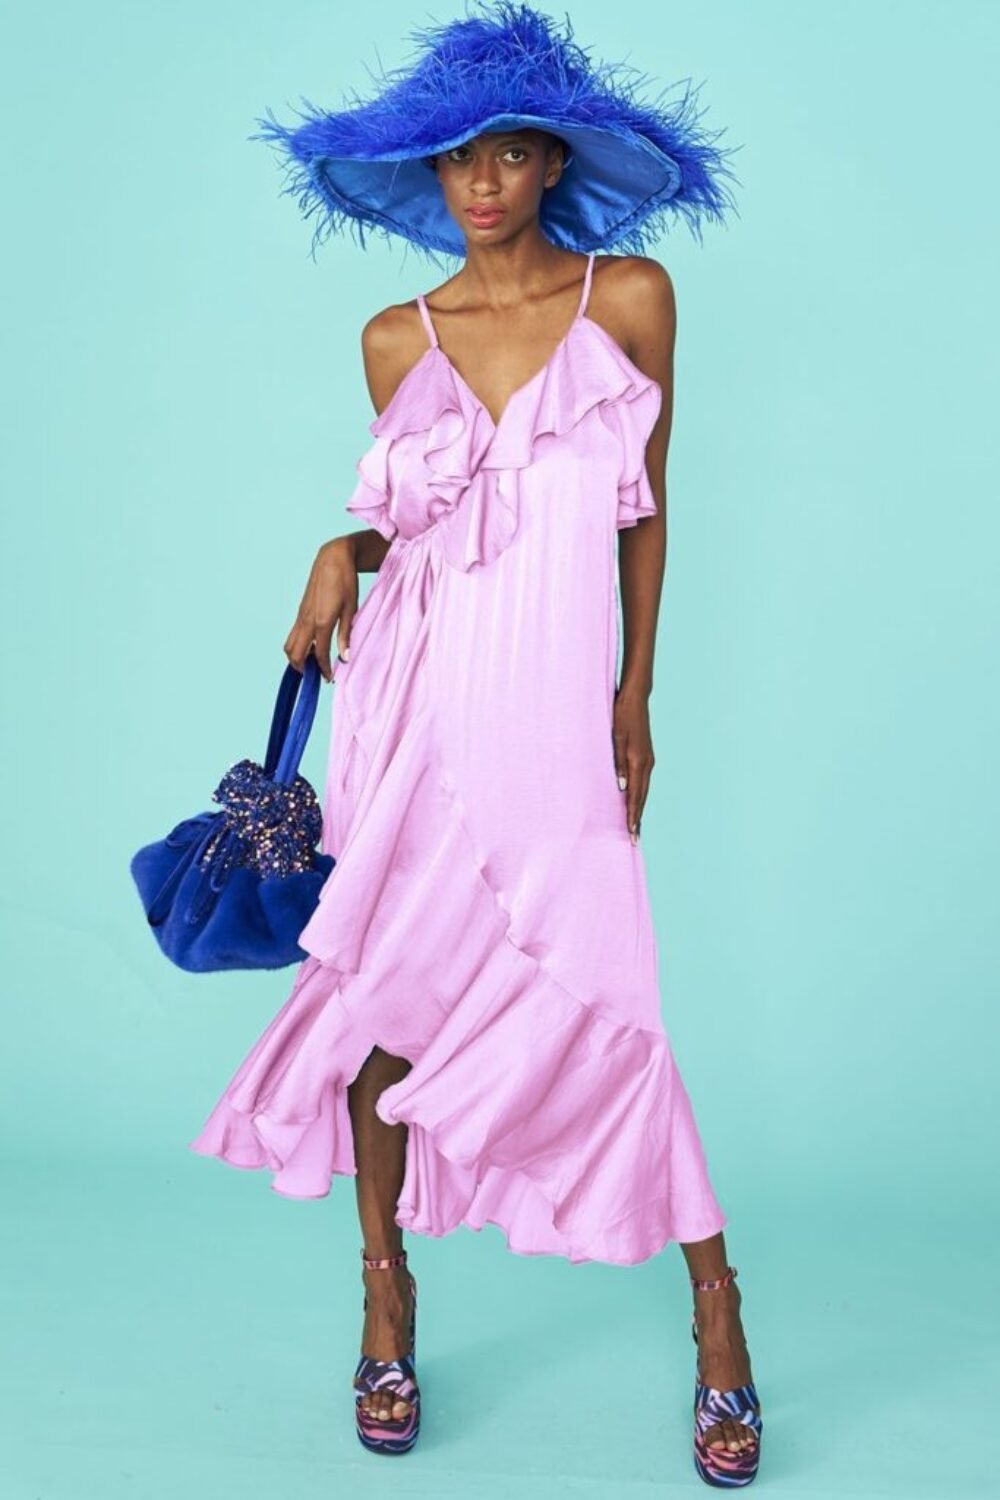 Shop Lux Pink Silk Blend Maxi Wrap Ruffle Dress and women's luxury and designer clothes at www.lux-apparel.co.uk